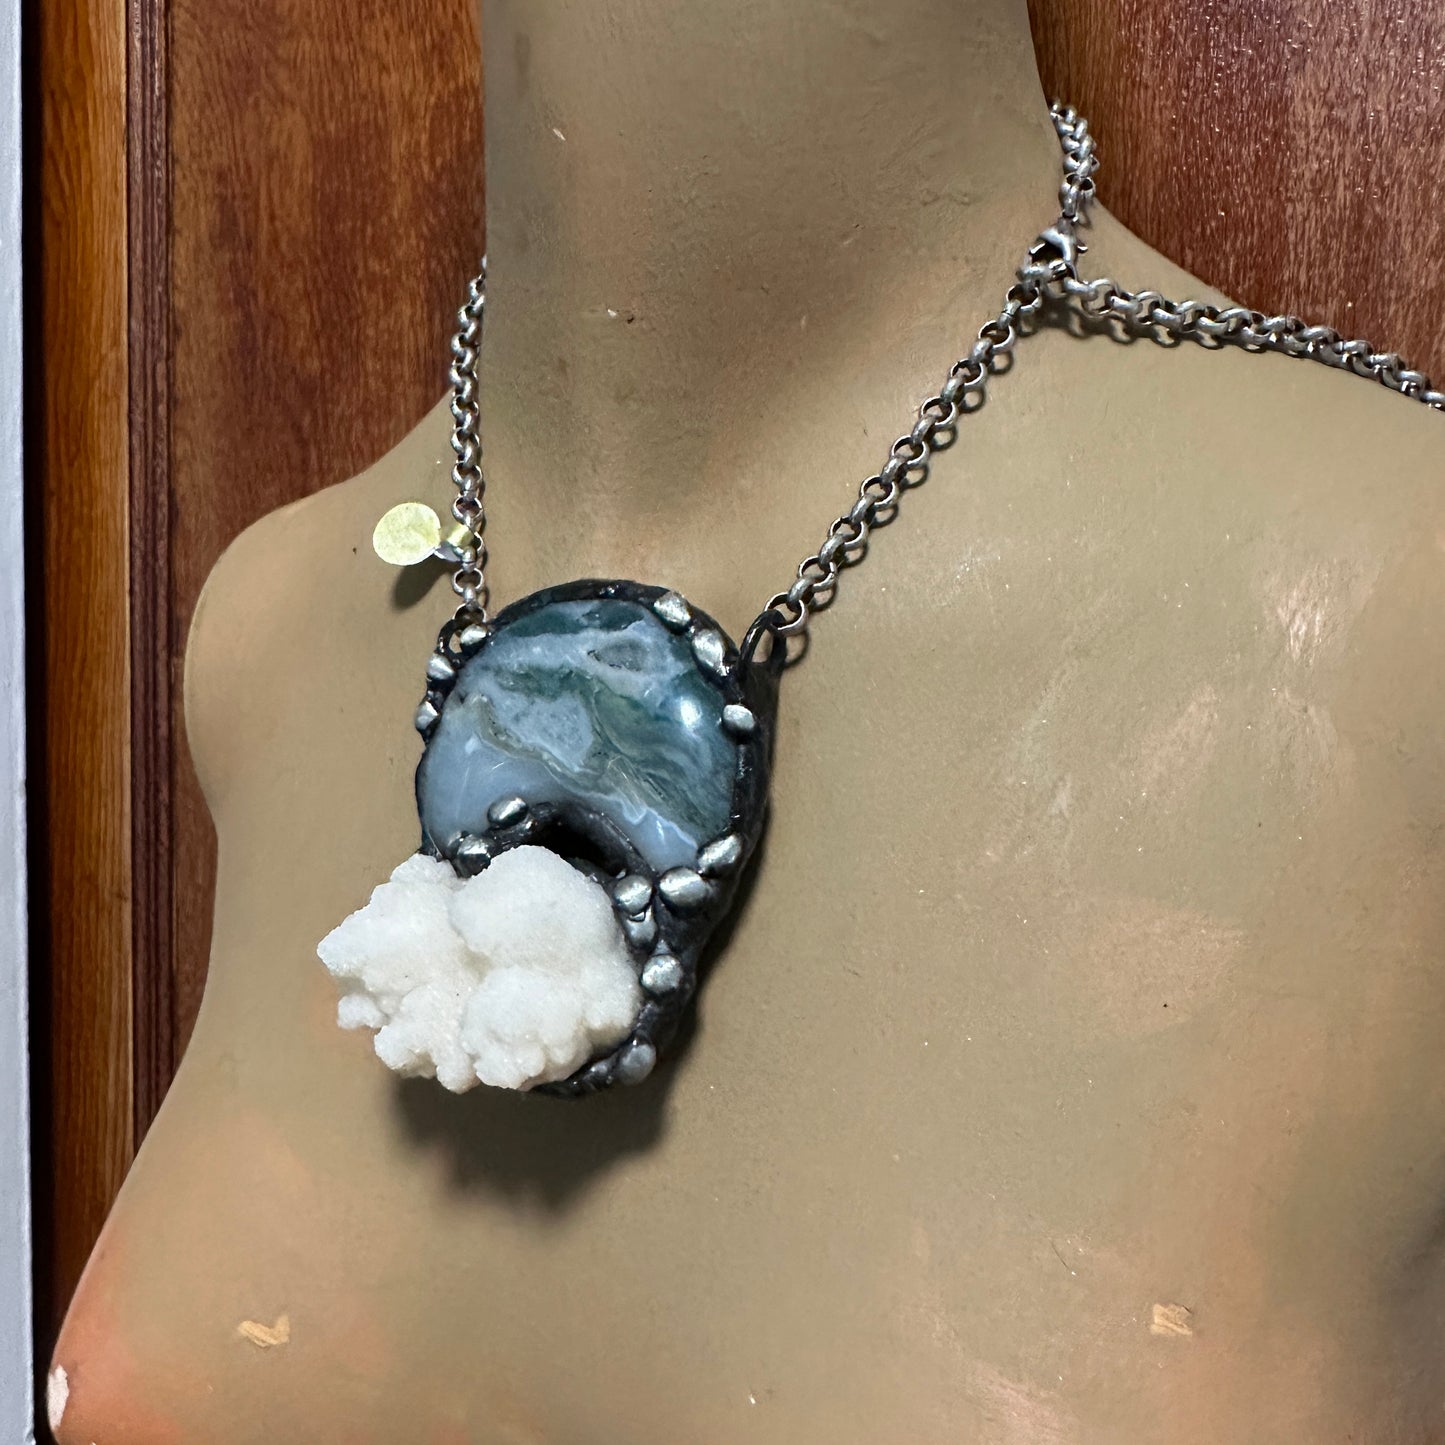 In The Clouds ~ Moss Agate & Calcium Stalactite Necklace